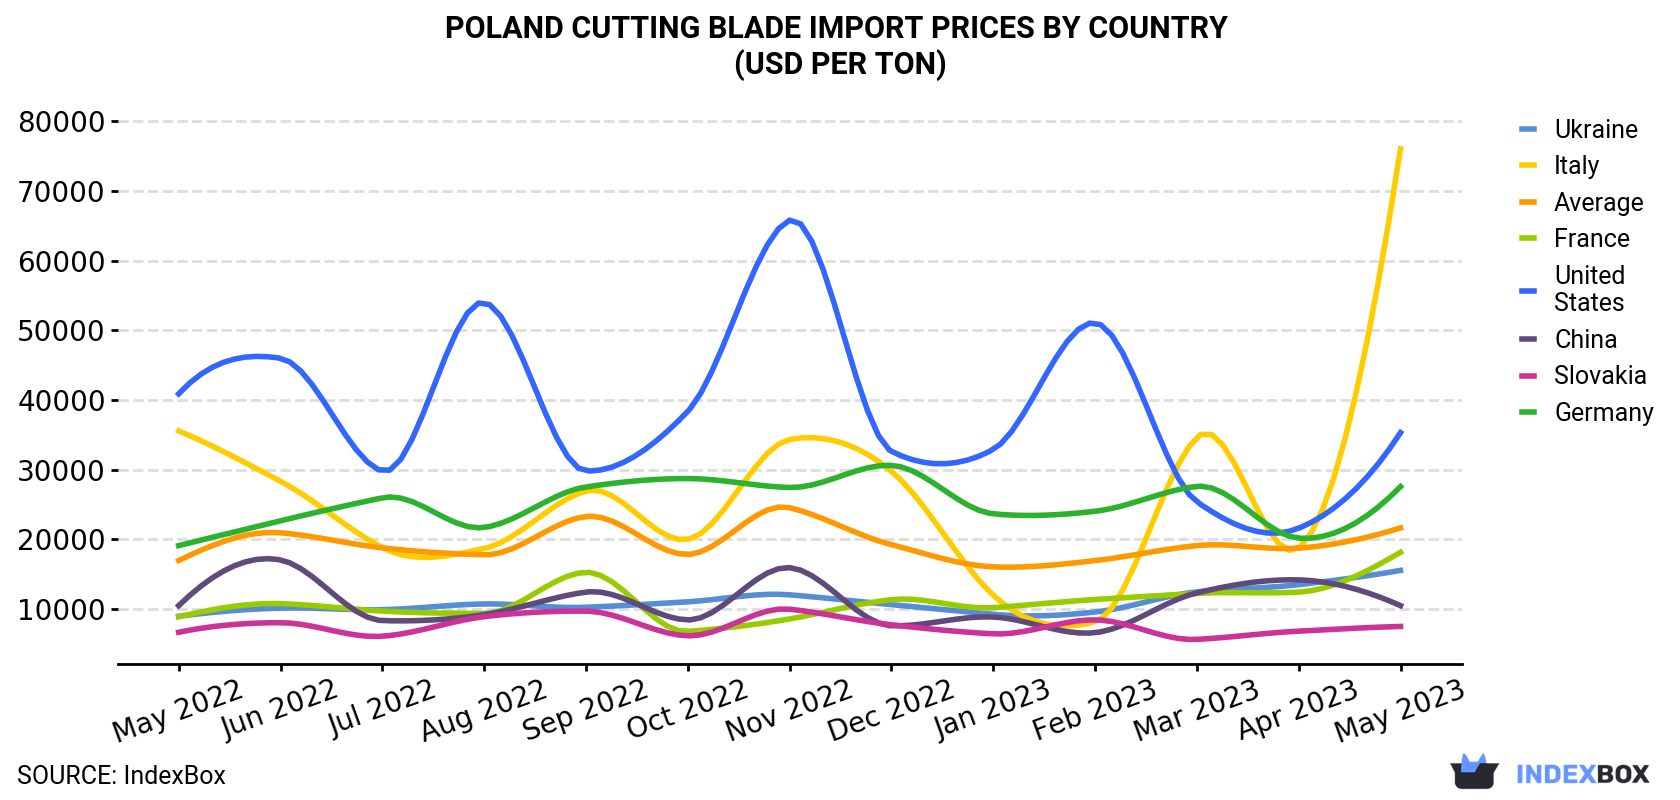 Poland Cutting Blade Import Prices By Country (USD Per Ton)